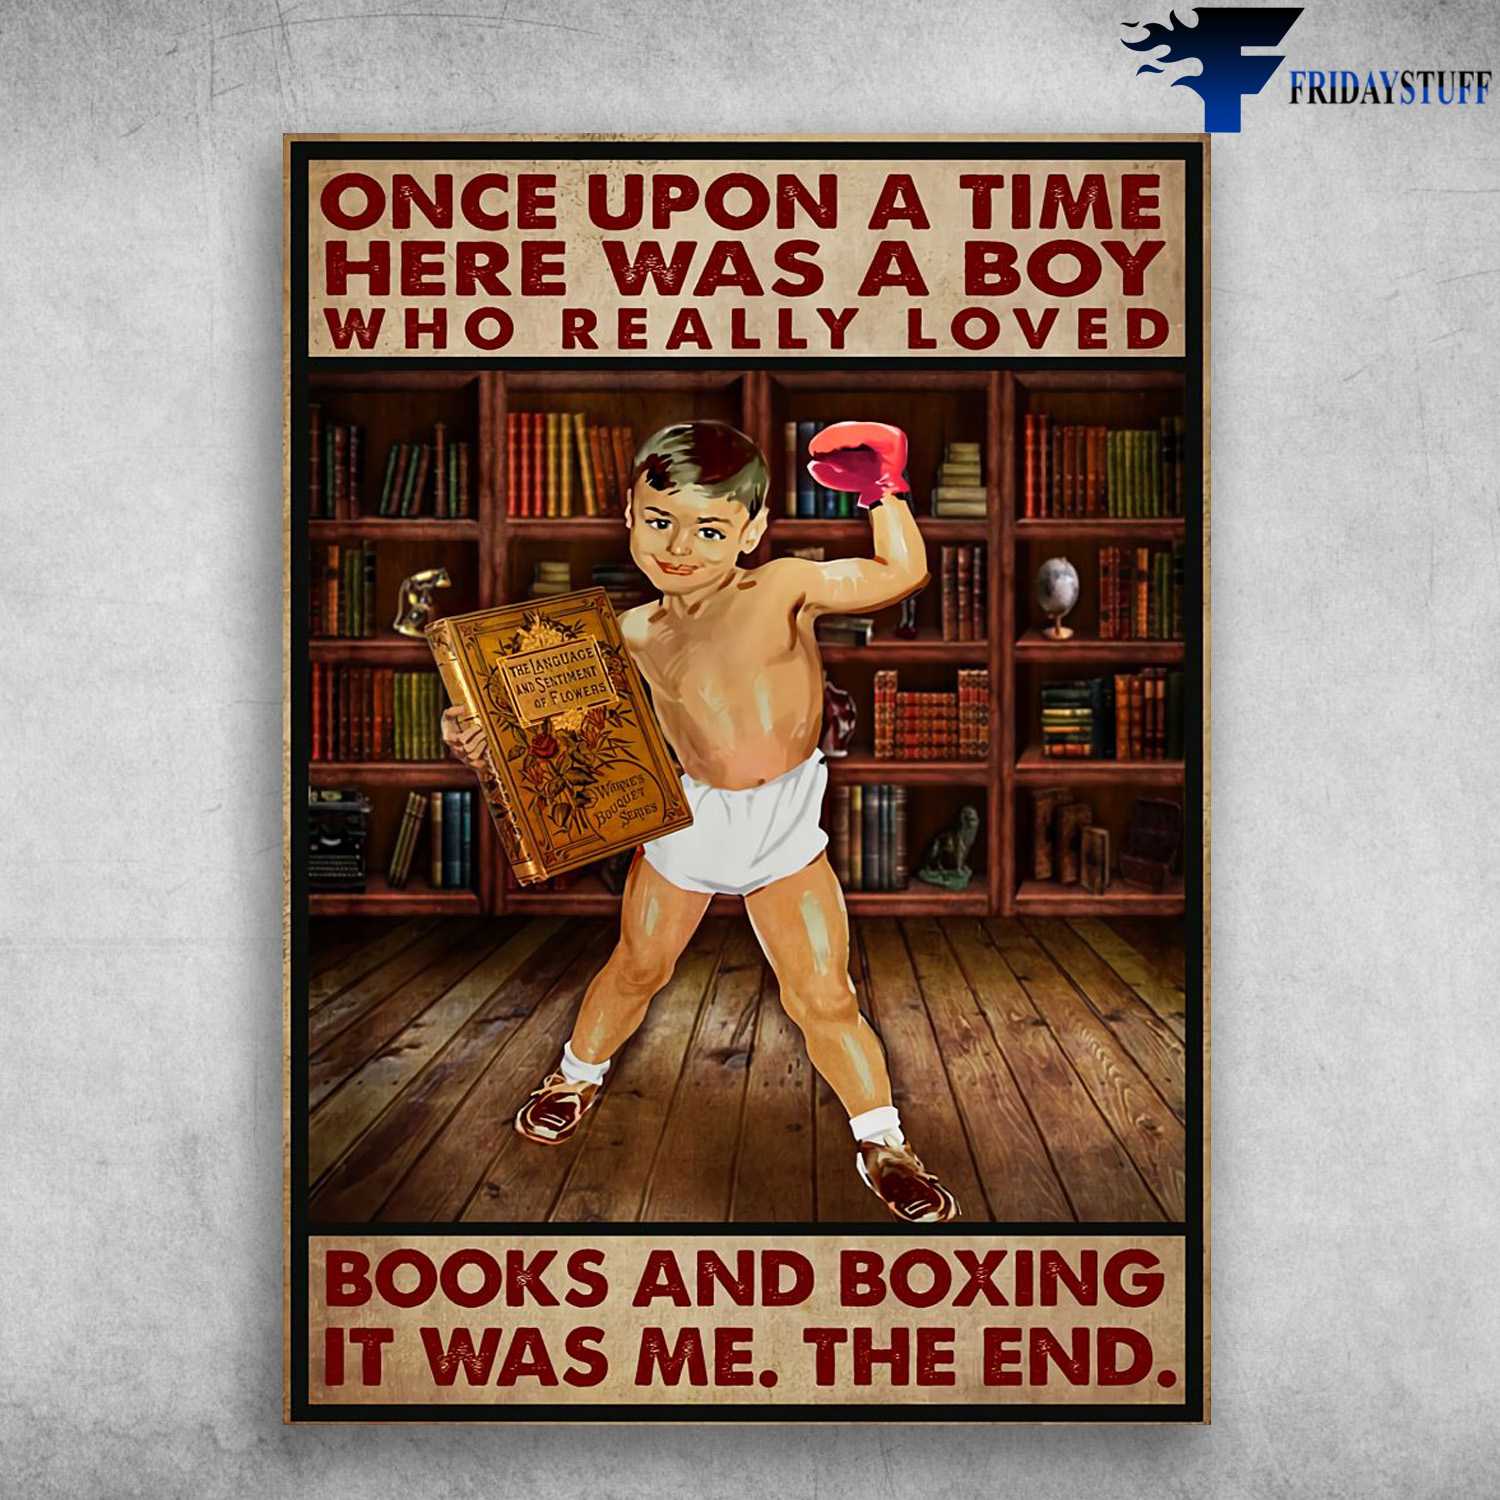 Reading And Boxing - Once Upon A Time, Here Was A Boy, Who Really Loved Books And Boxing, In Was Me, The End